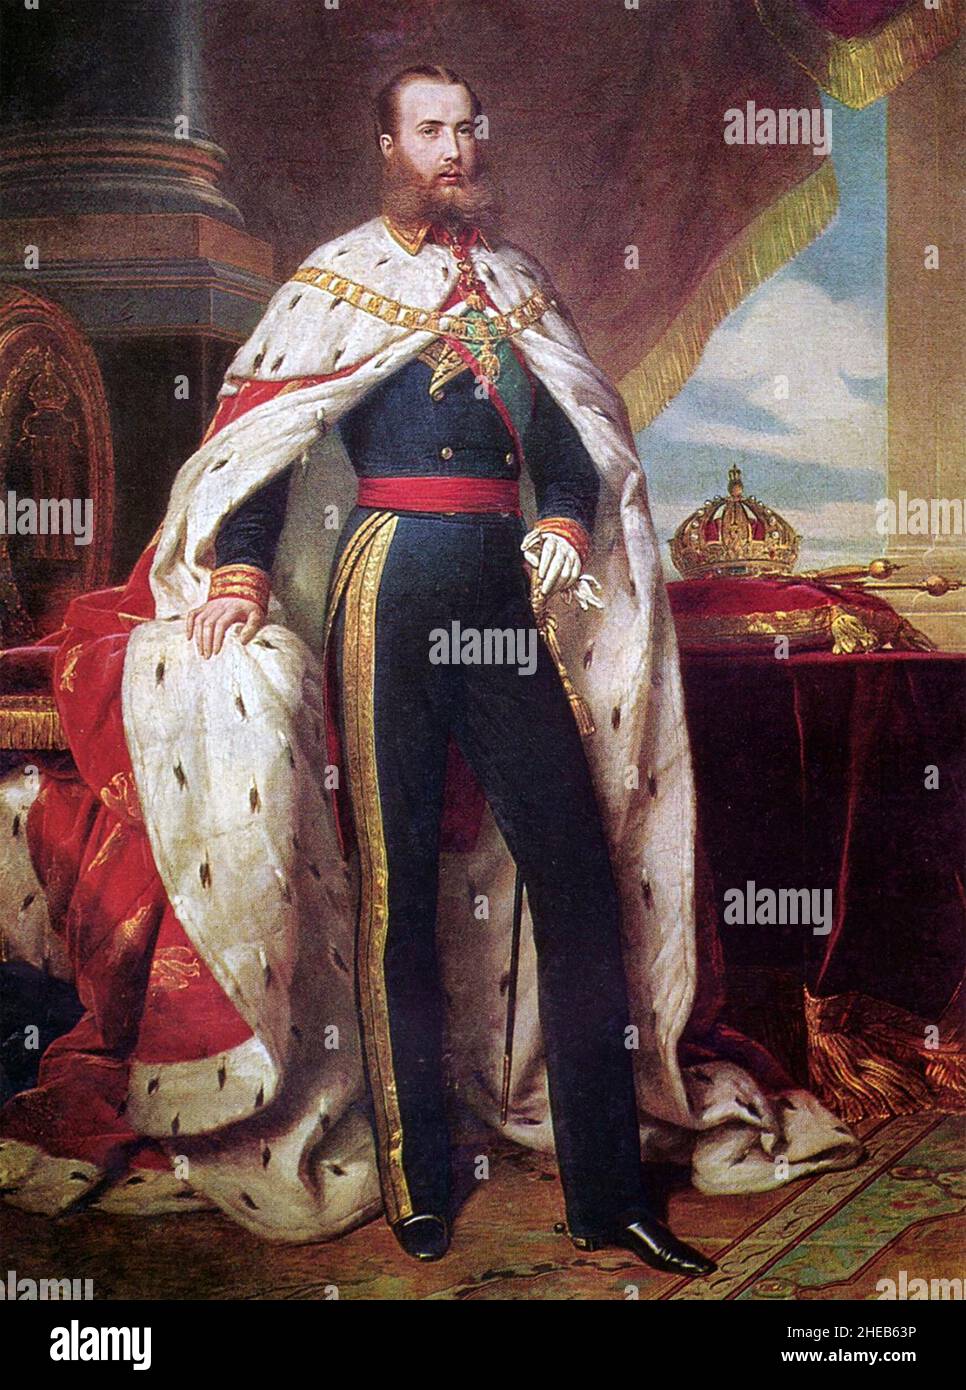 MAXIMILIAN I OF MEXICO (1832-1867) painted by Franz Winterhalter in 1864. Stock Photo